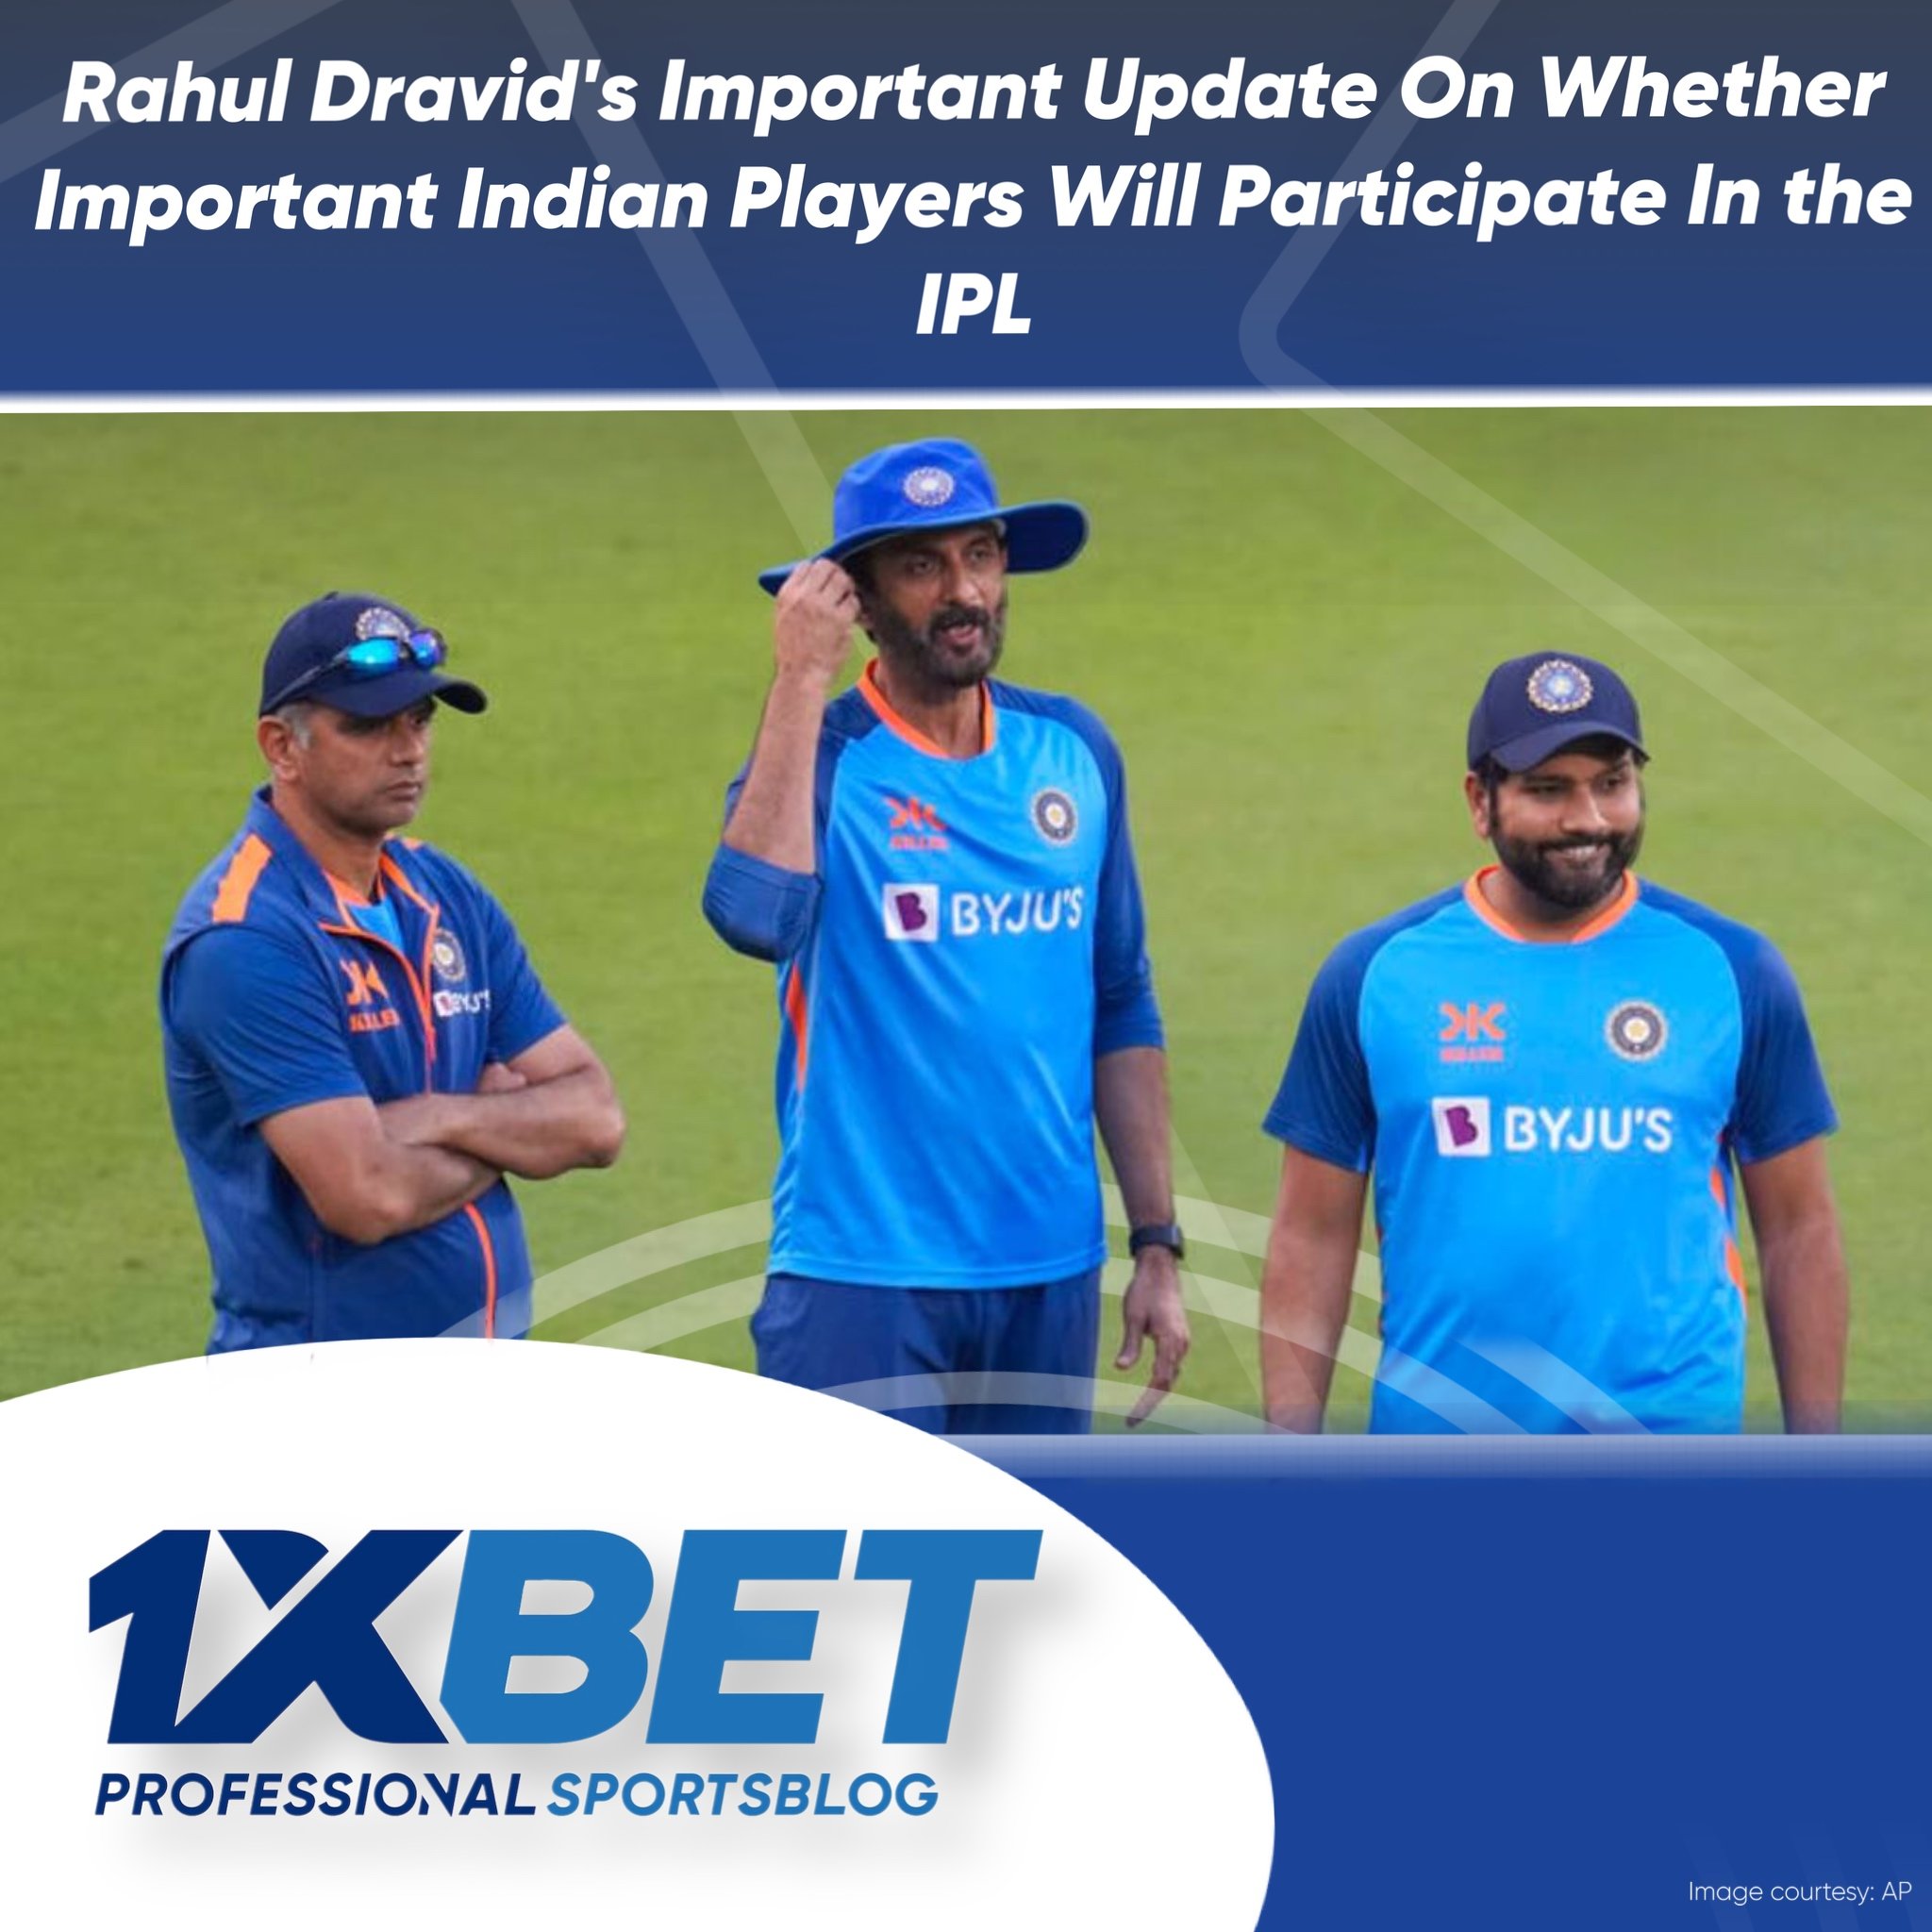 Rahul Dravid's Important Update On Whether Important Indian Players Will Participate In the IPL